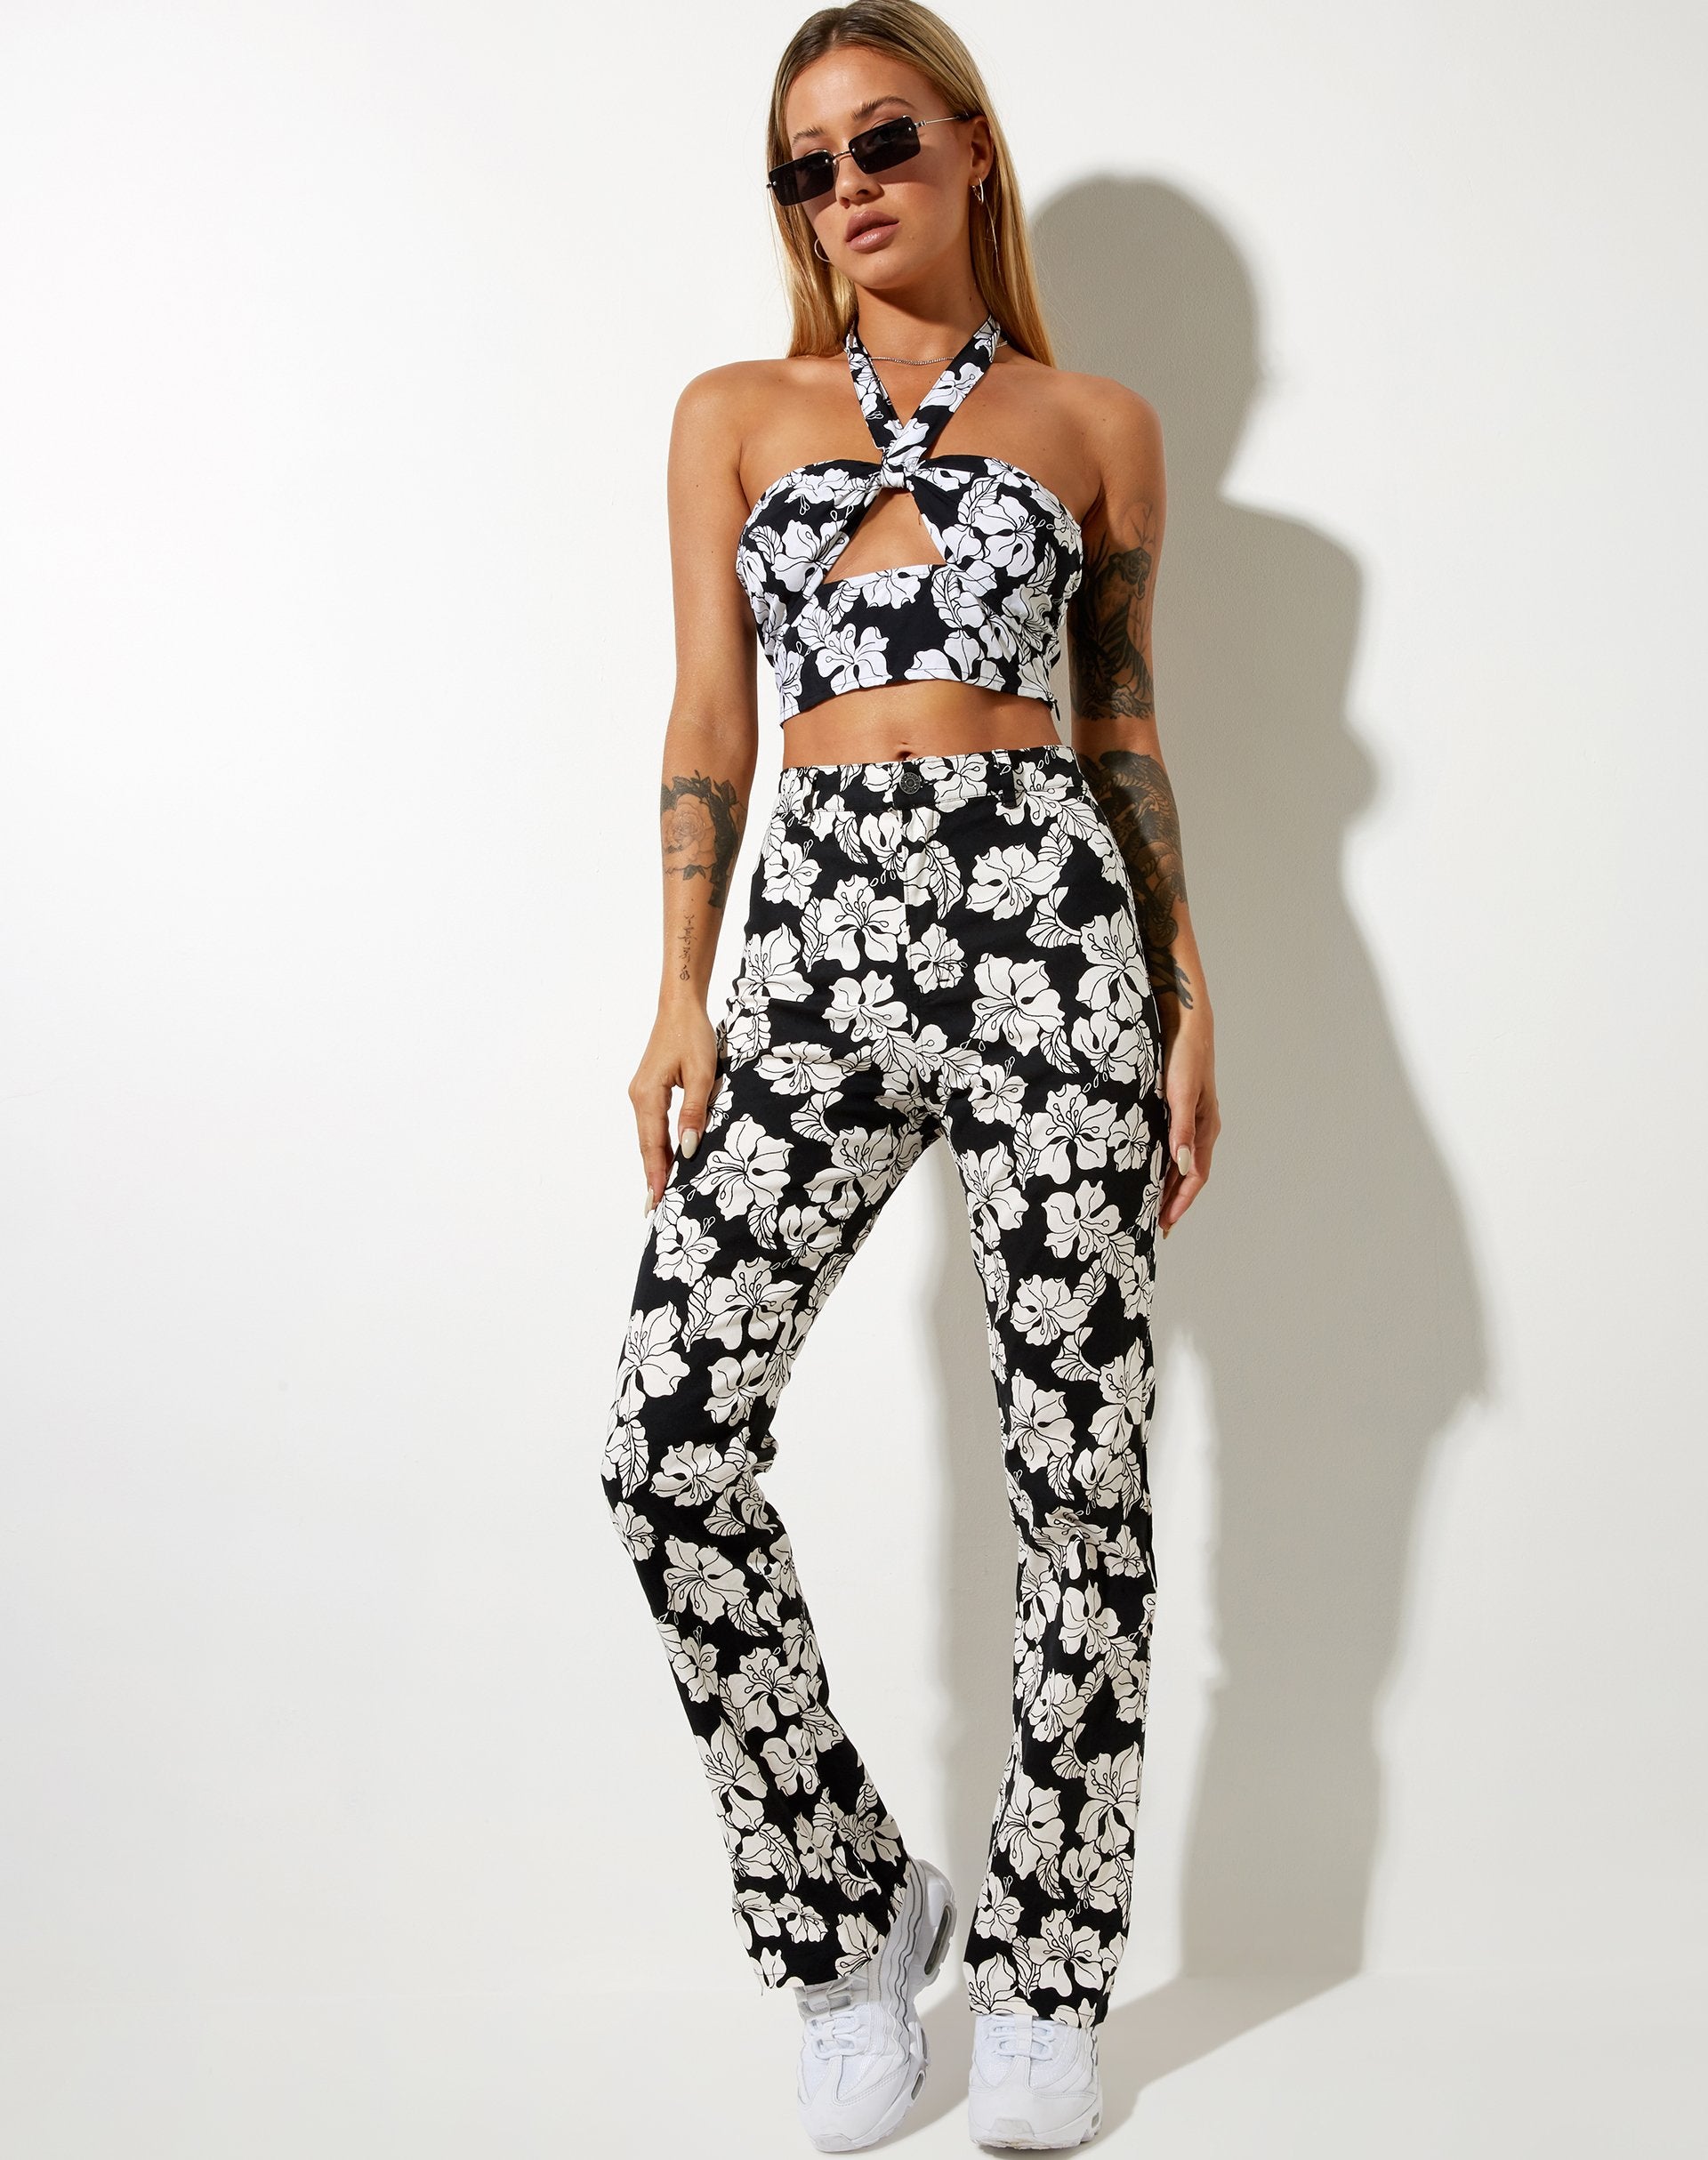 Image of Zoven Trouser in Vacation Black White